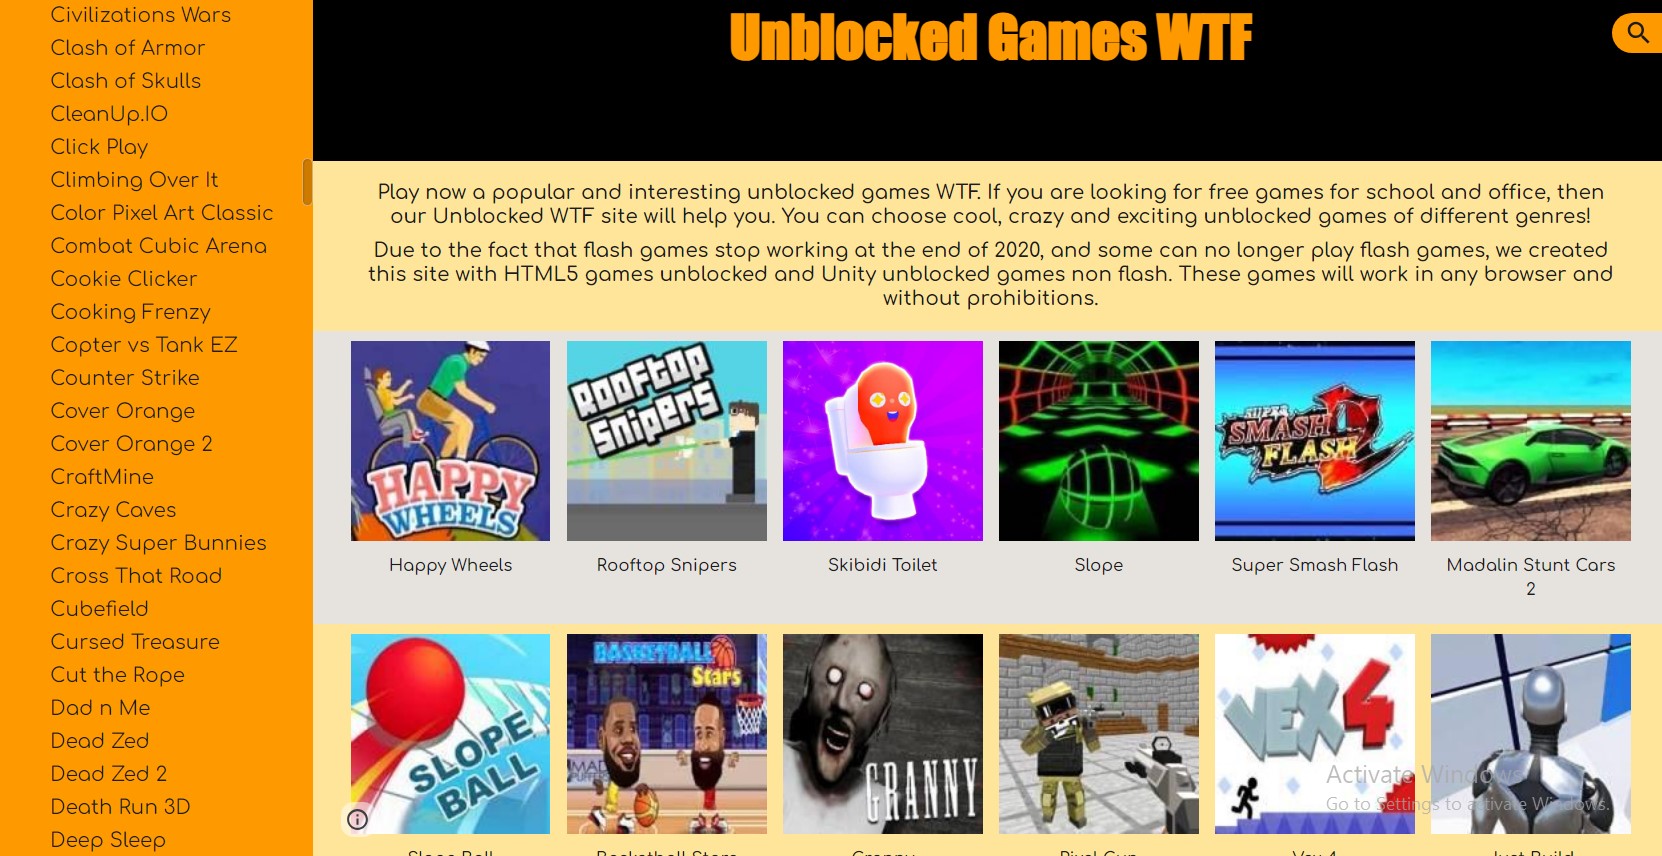 Unblocked Games wtf : An Engaging Way to Connect with Friends Online by  Magazines Pro - Issuu